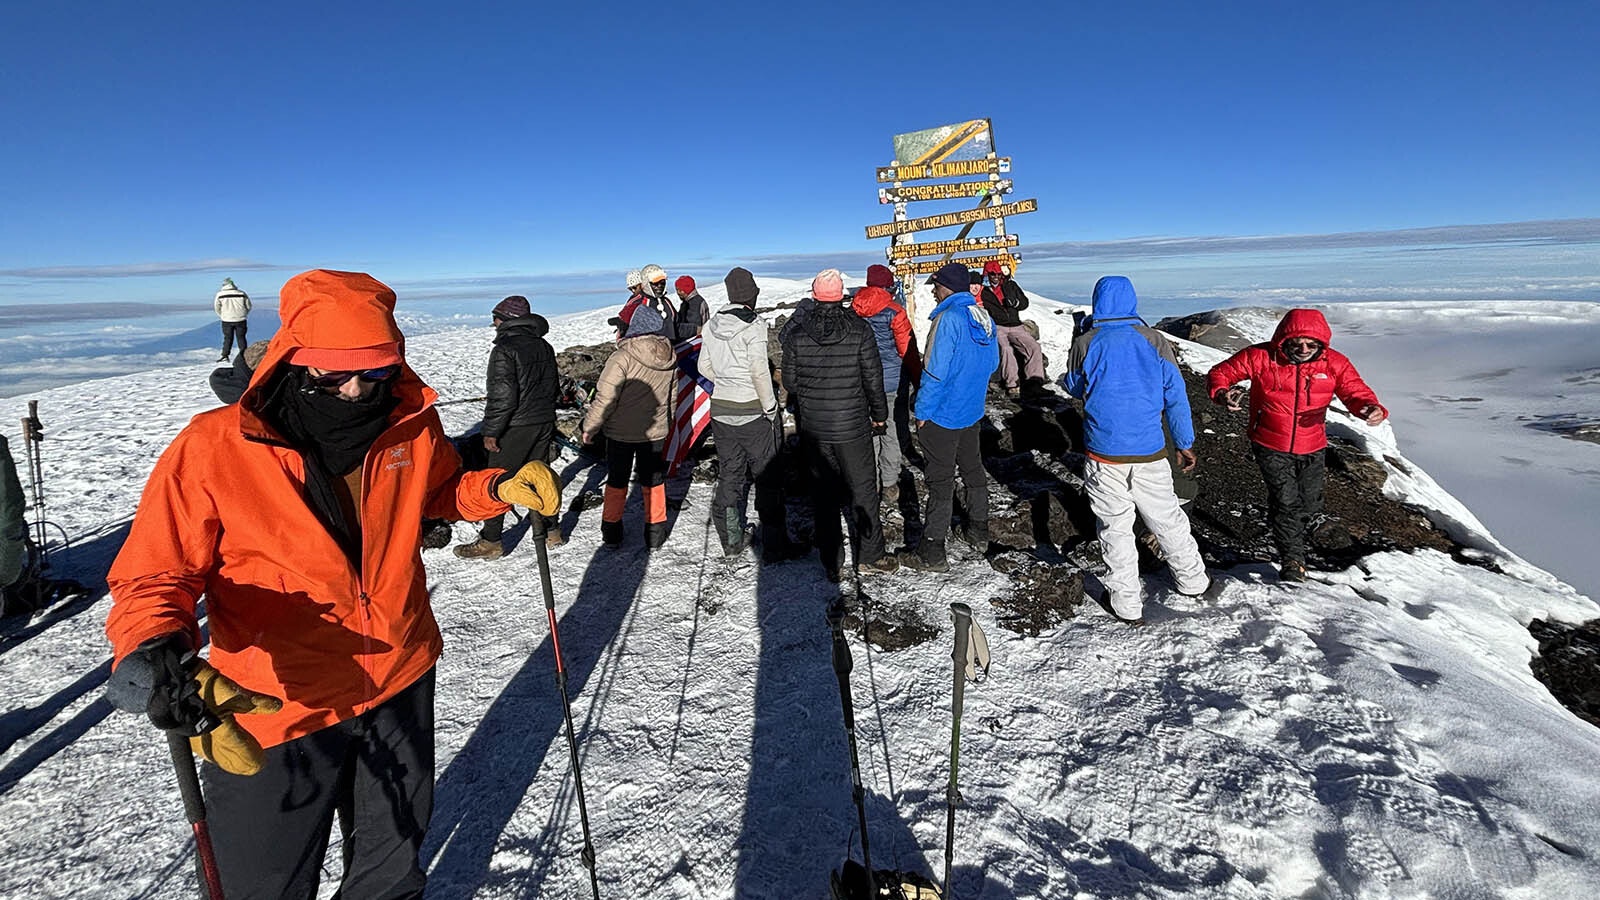 Chris Clifton and his climbing party at the top of Mount Kilimanjaro in Africa.